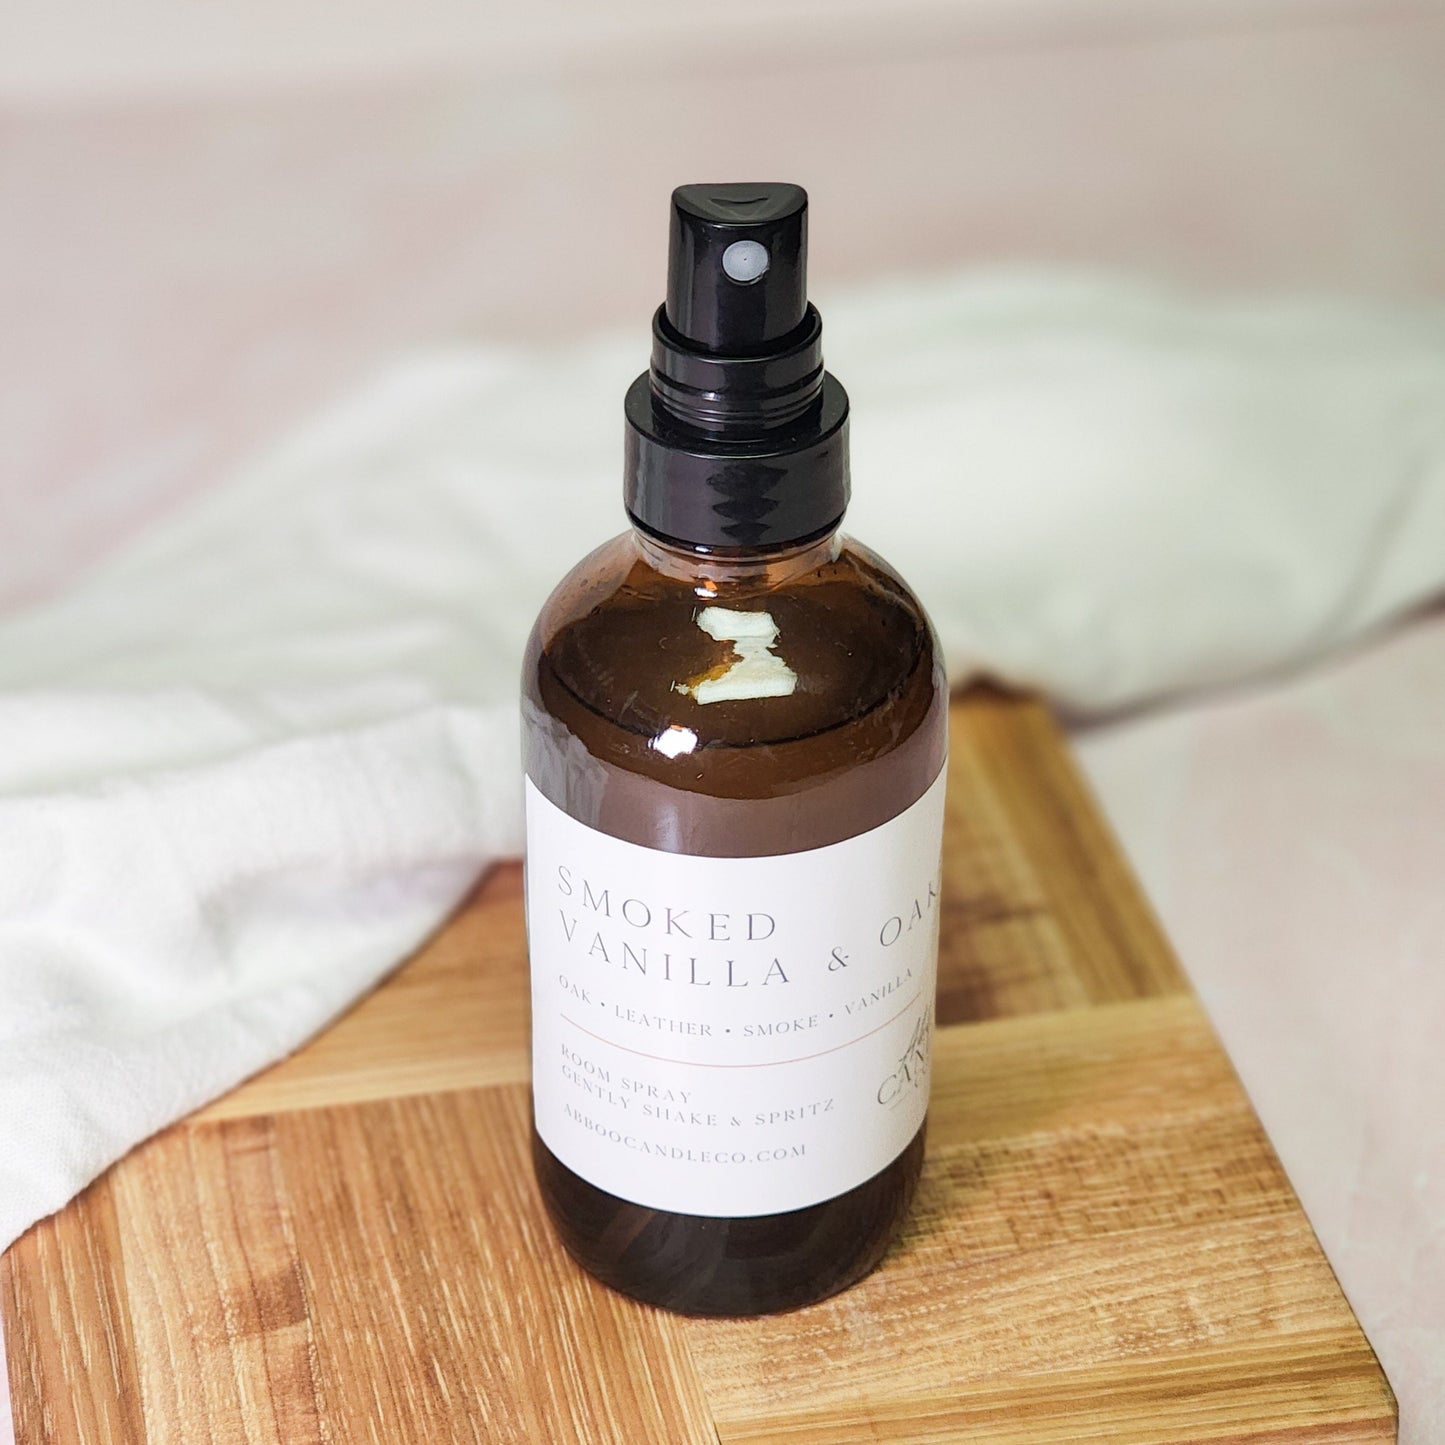 Smoked Vanilla and Oak Room Spray - Abboo Candle Co® Wholesale